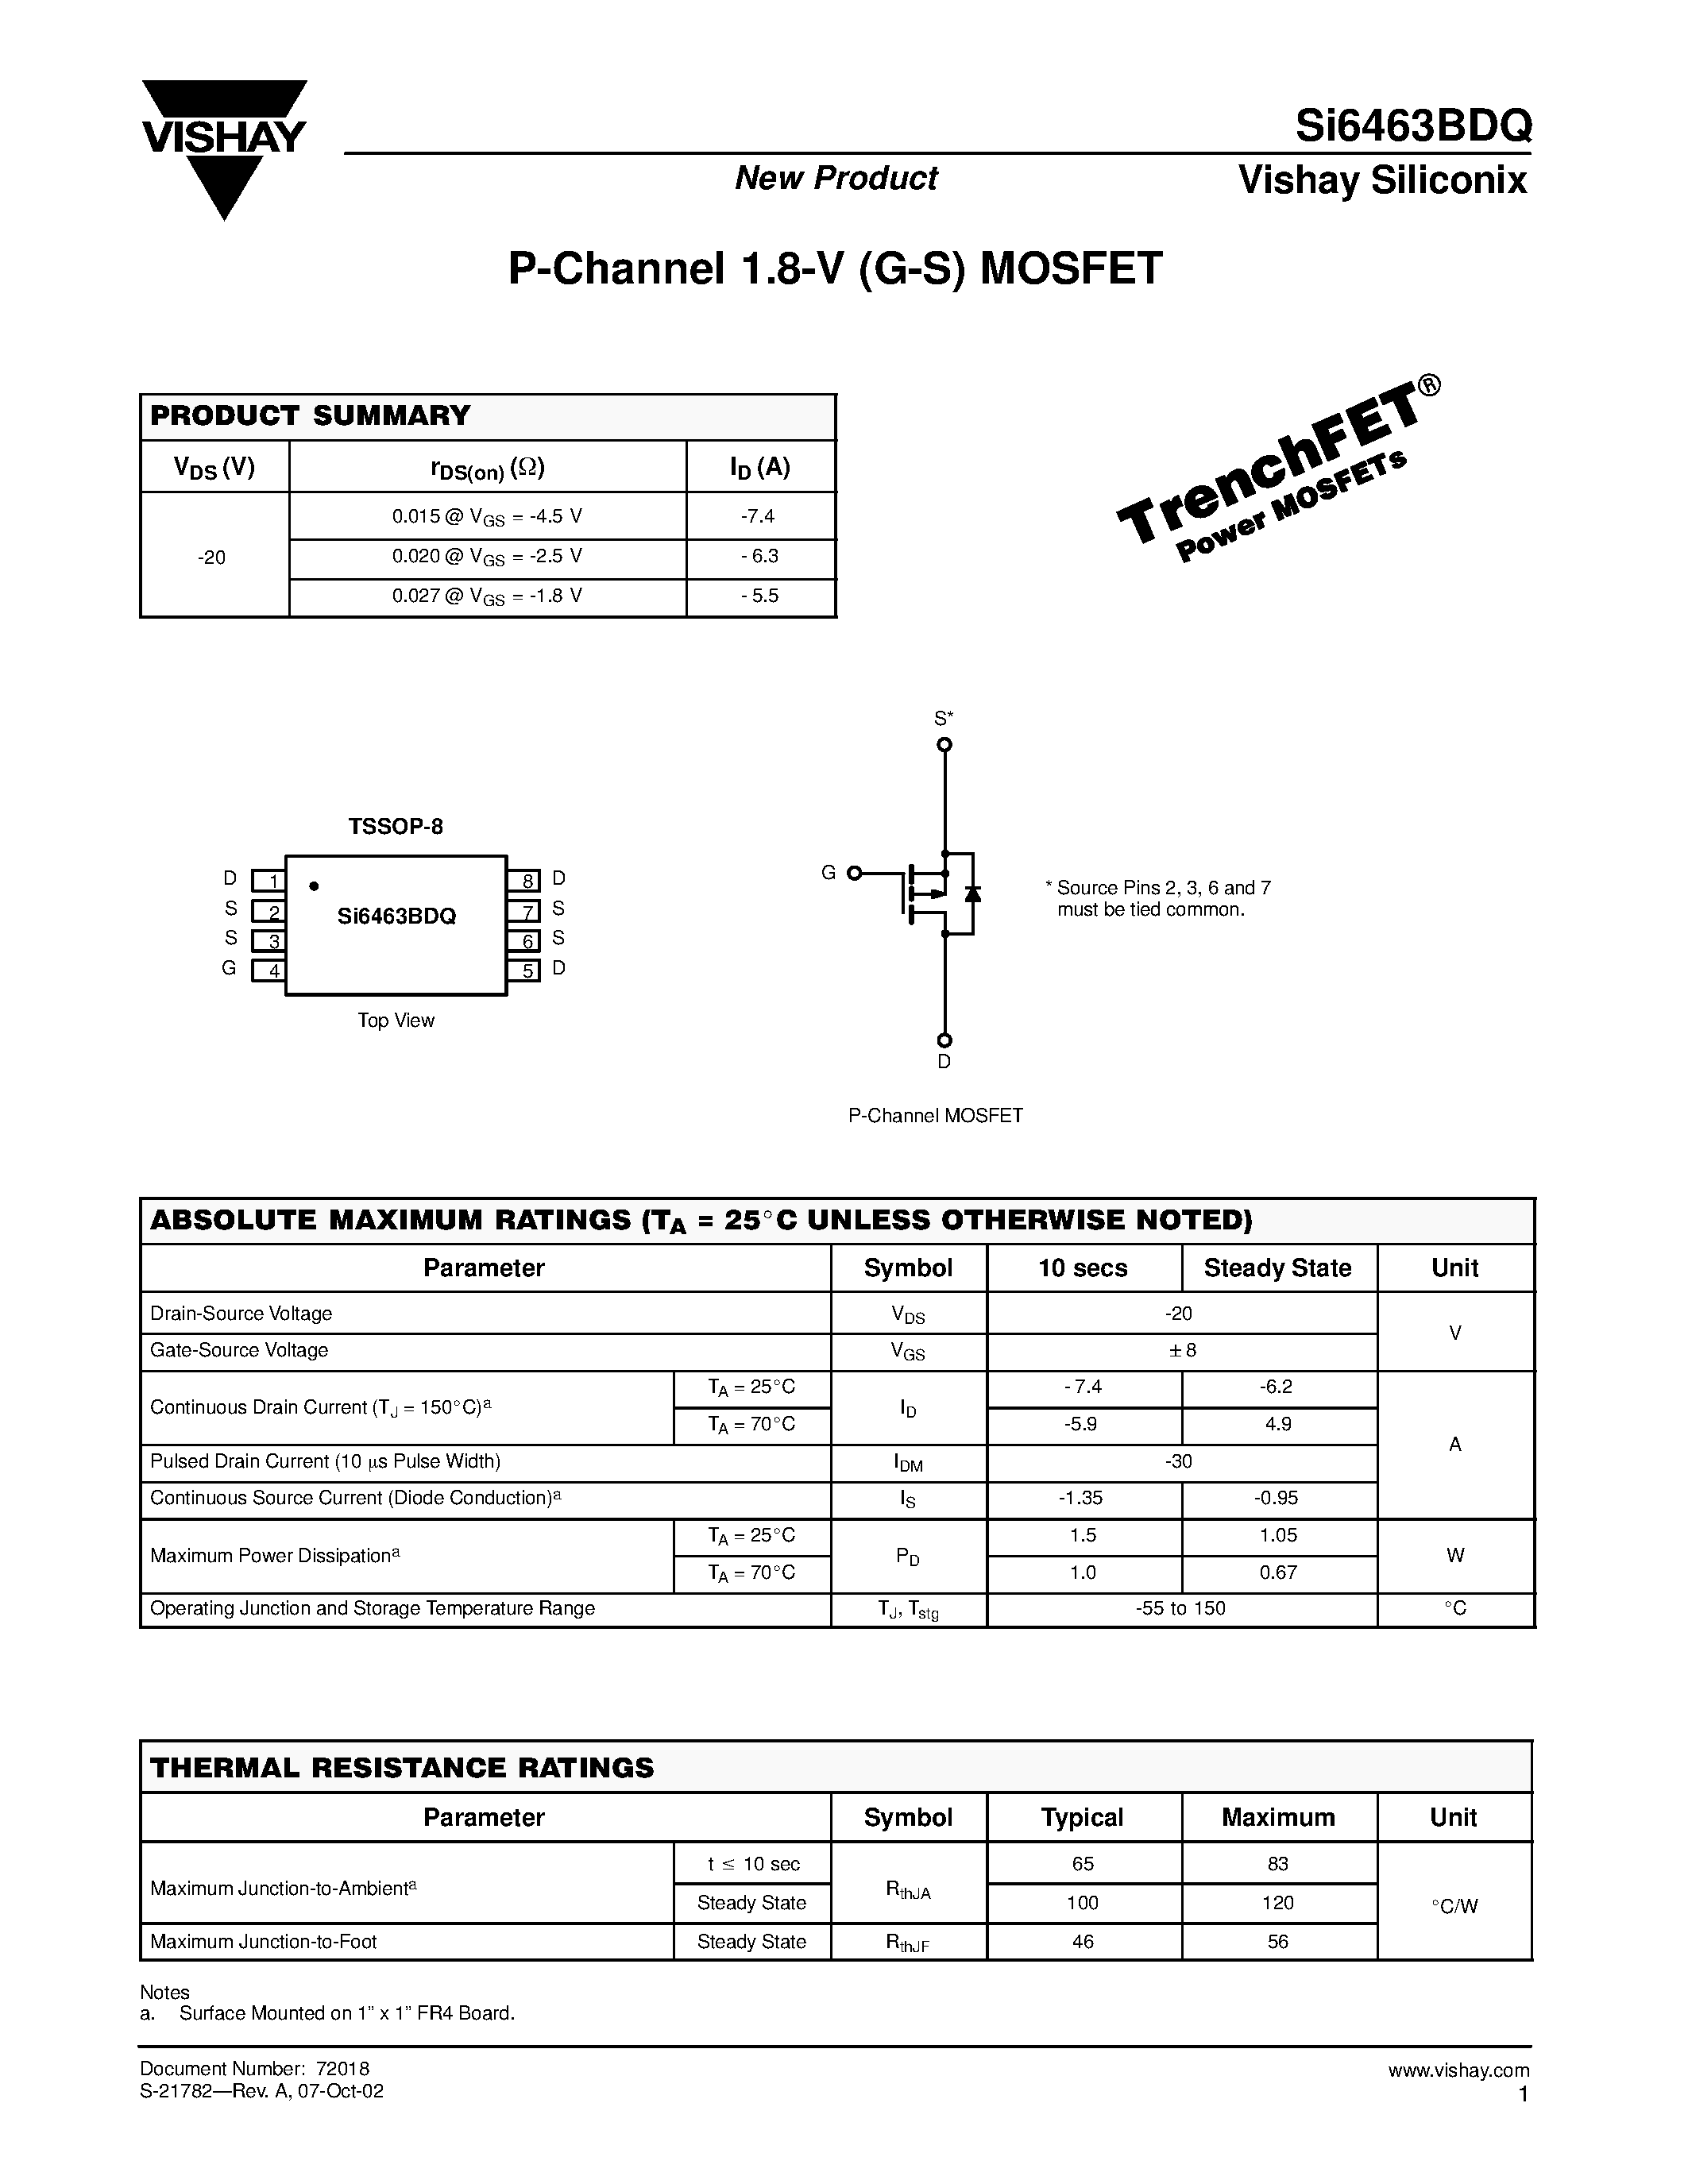 Datasheet SI6463BDQ - P-Channel 1.8-V (G-S) MOSFET page 1